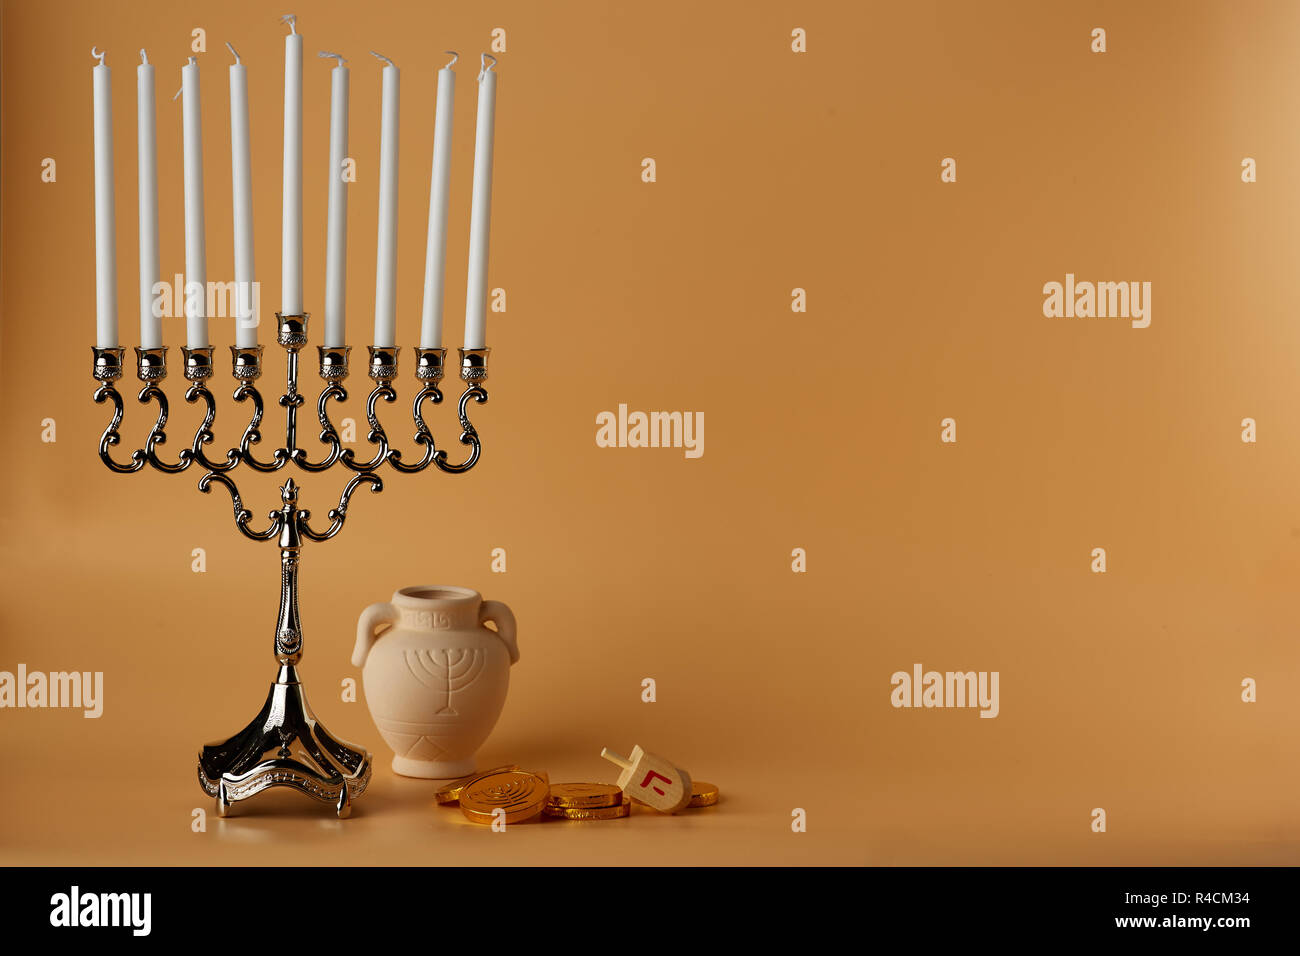 Menorah candlestick and pile of coins for holiday Stock Photo